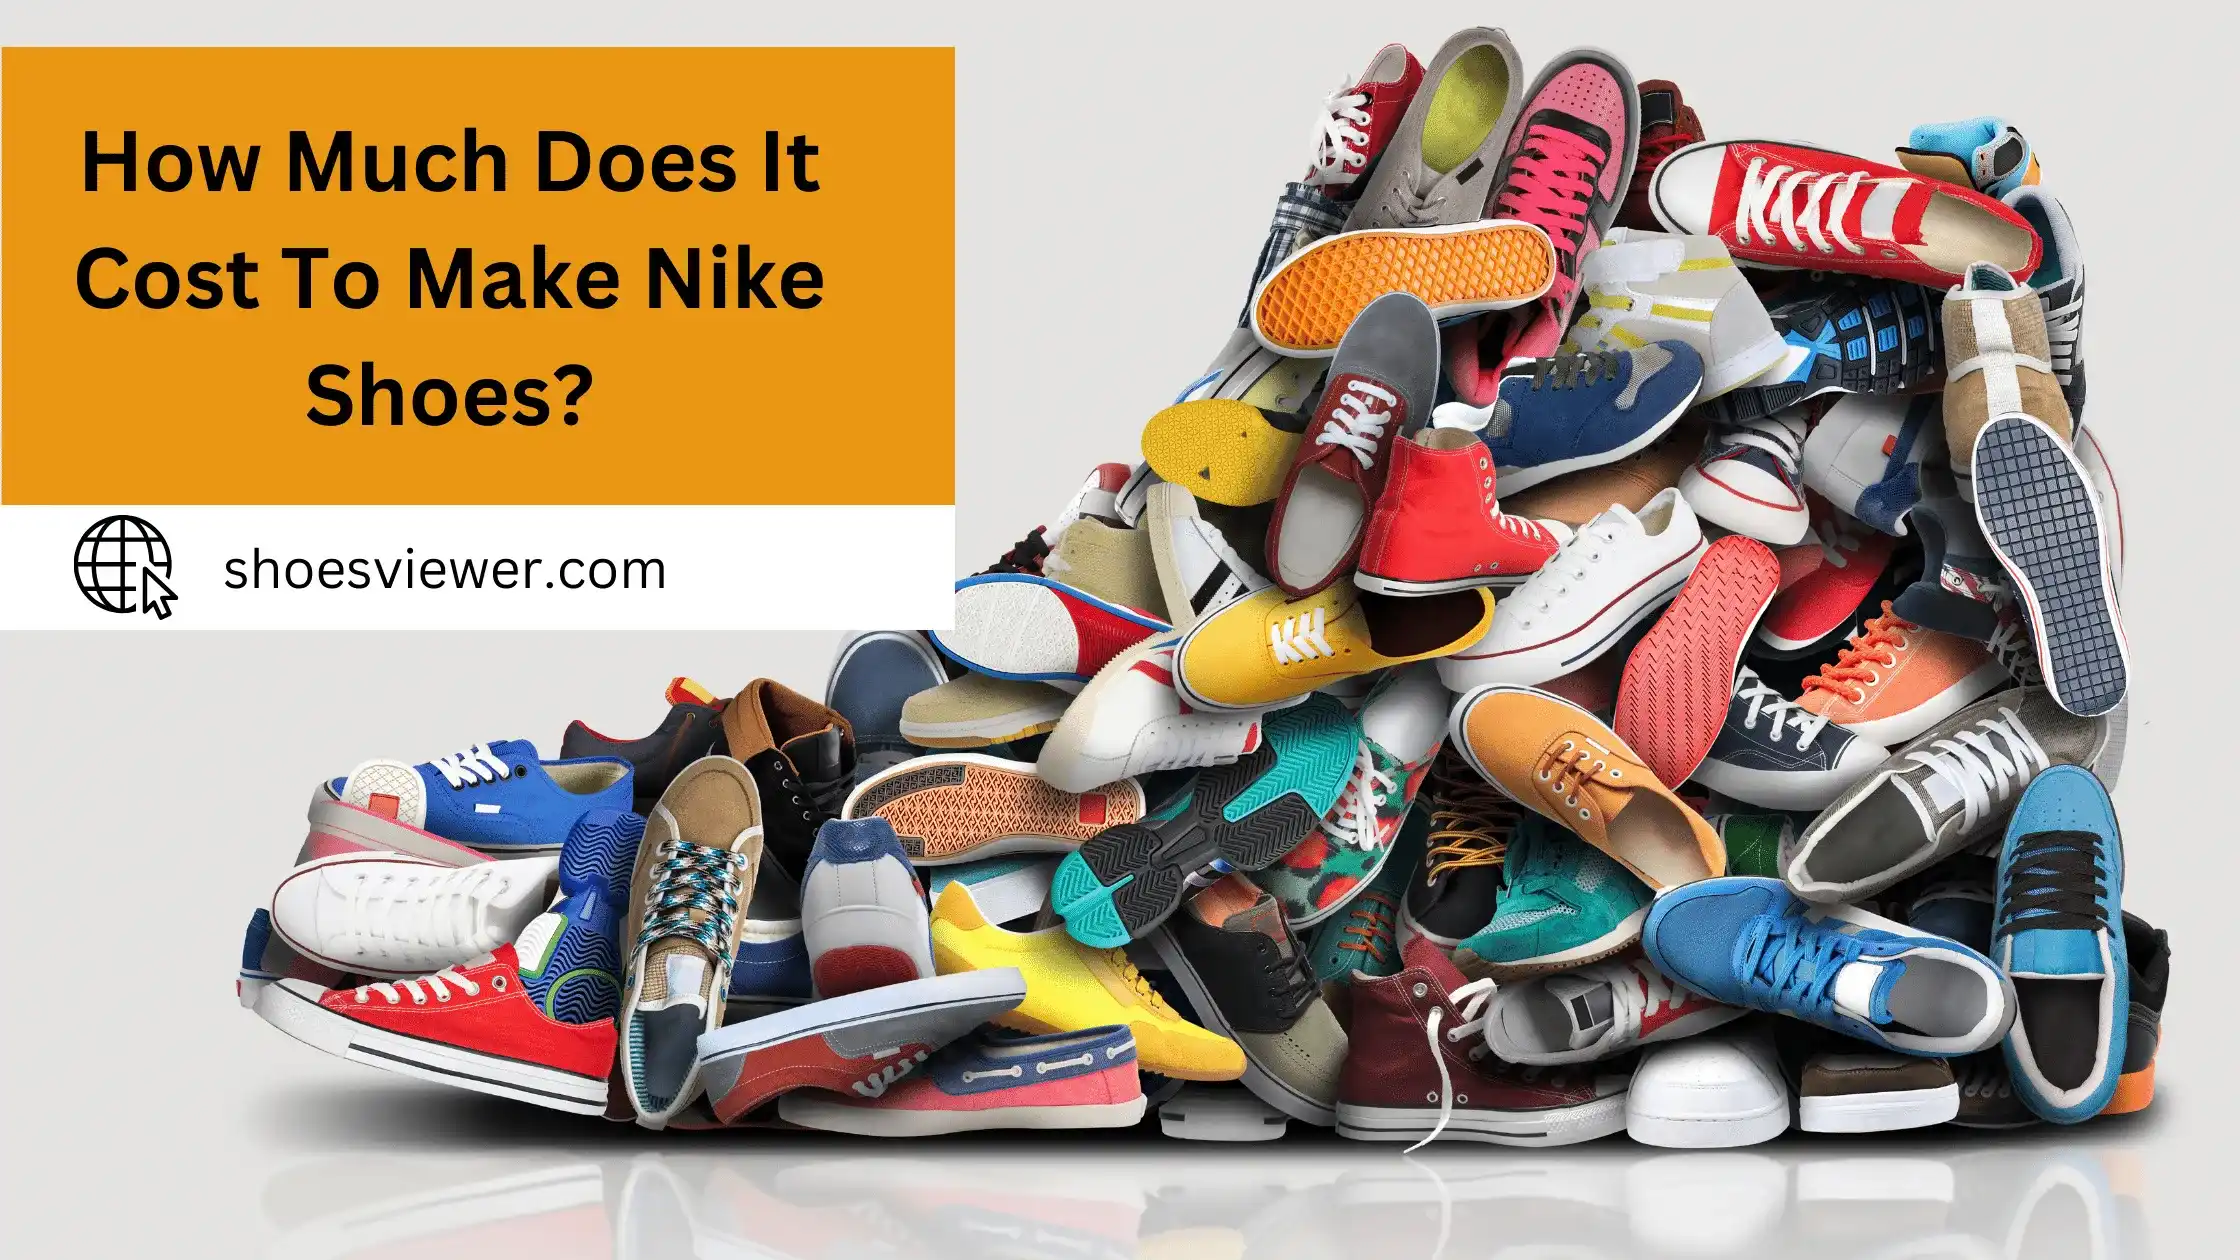 How Much Does It Cost To Make Nike Shoes? Easy Guide